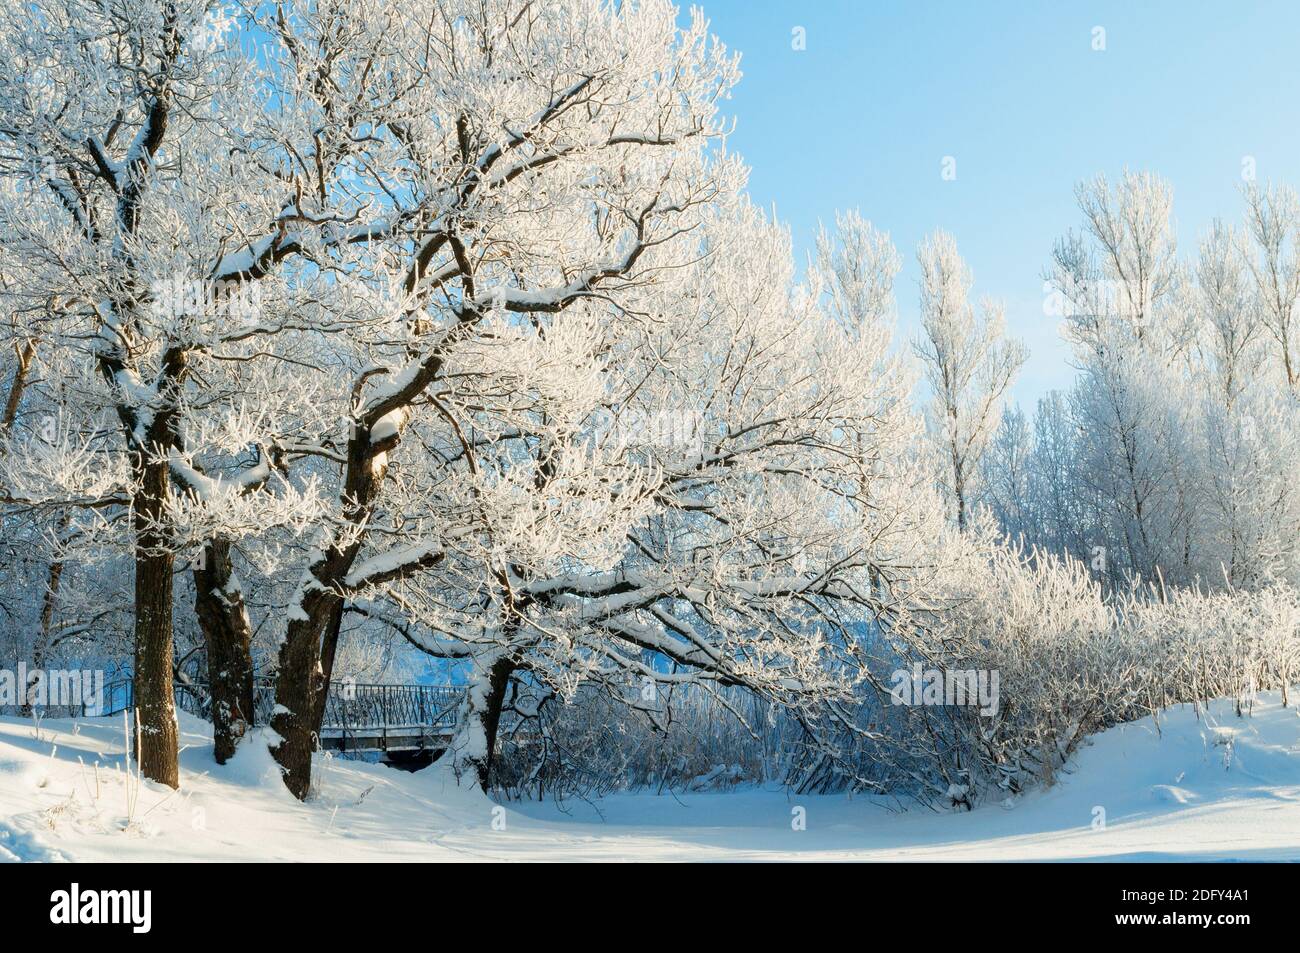 Winter landscape, snowy winter trees covered with ice and frost in sunny day. Wonderland winter forest with snowfall over trees Stock Photo